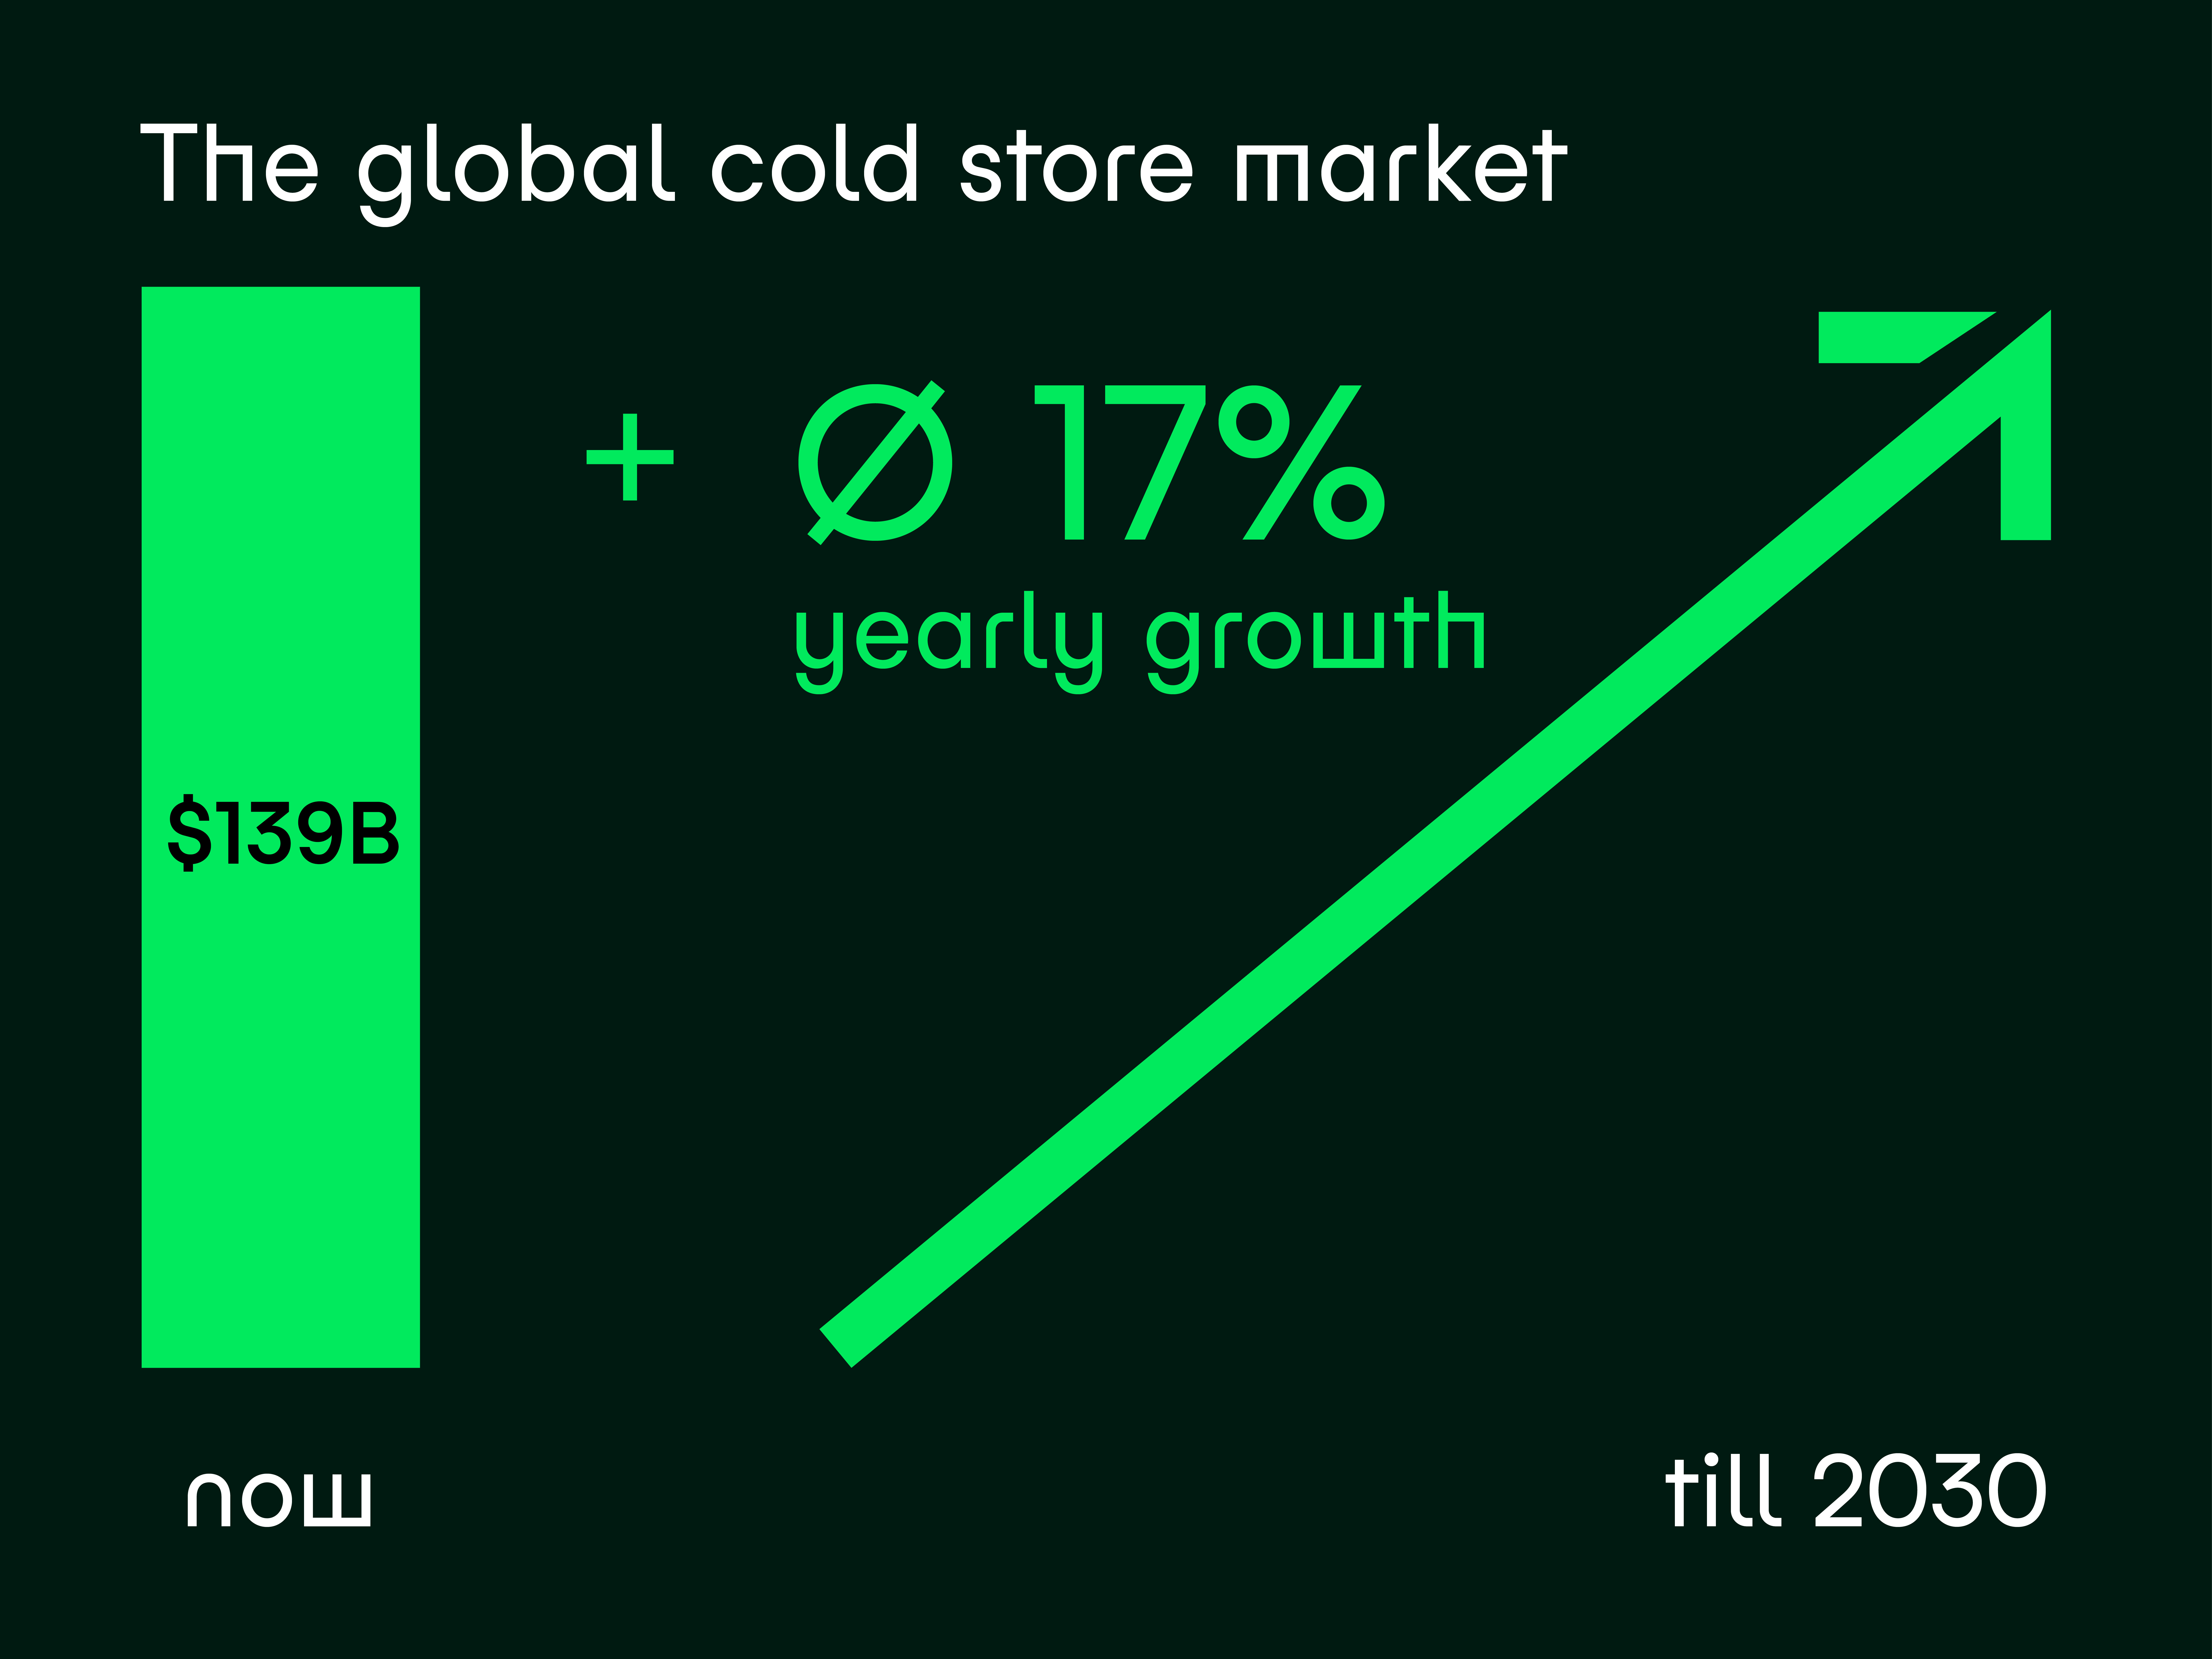 The global cold store market 17% yearly growth